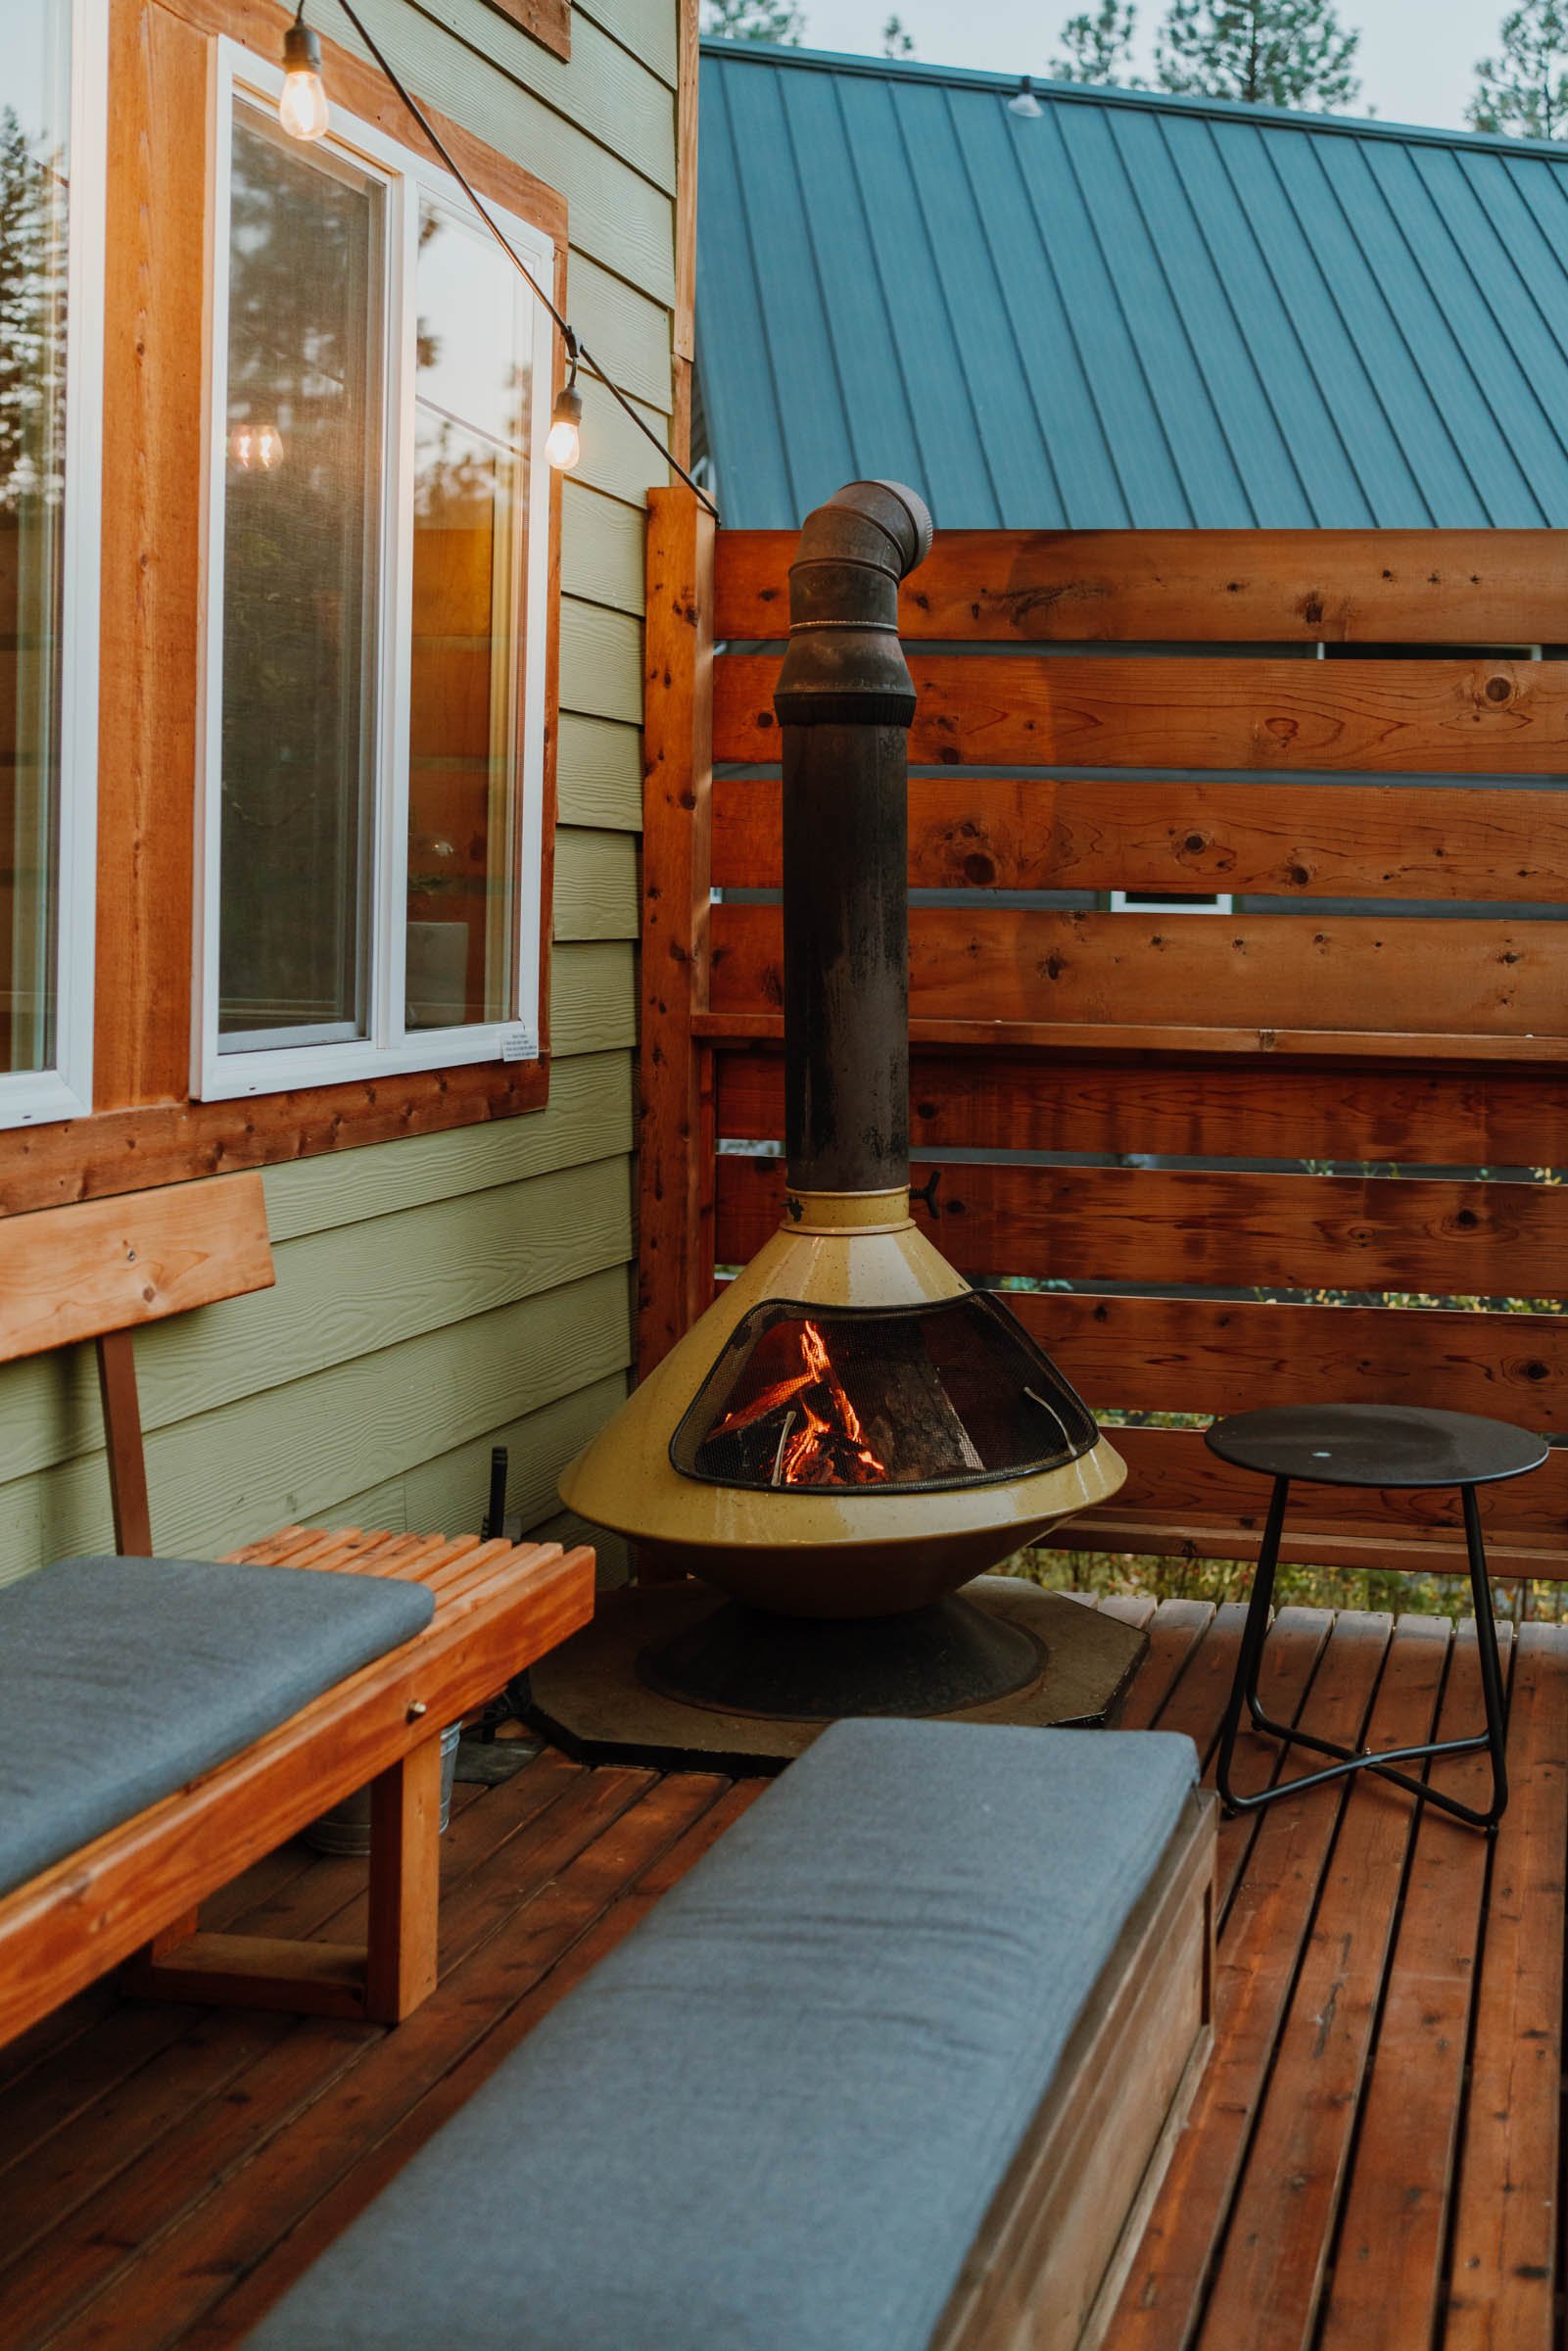 Vintage outdoor fireplace at the Gather Indie Treehouse in Washington